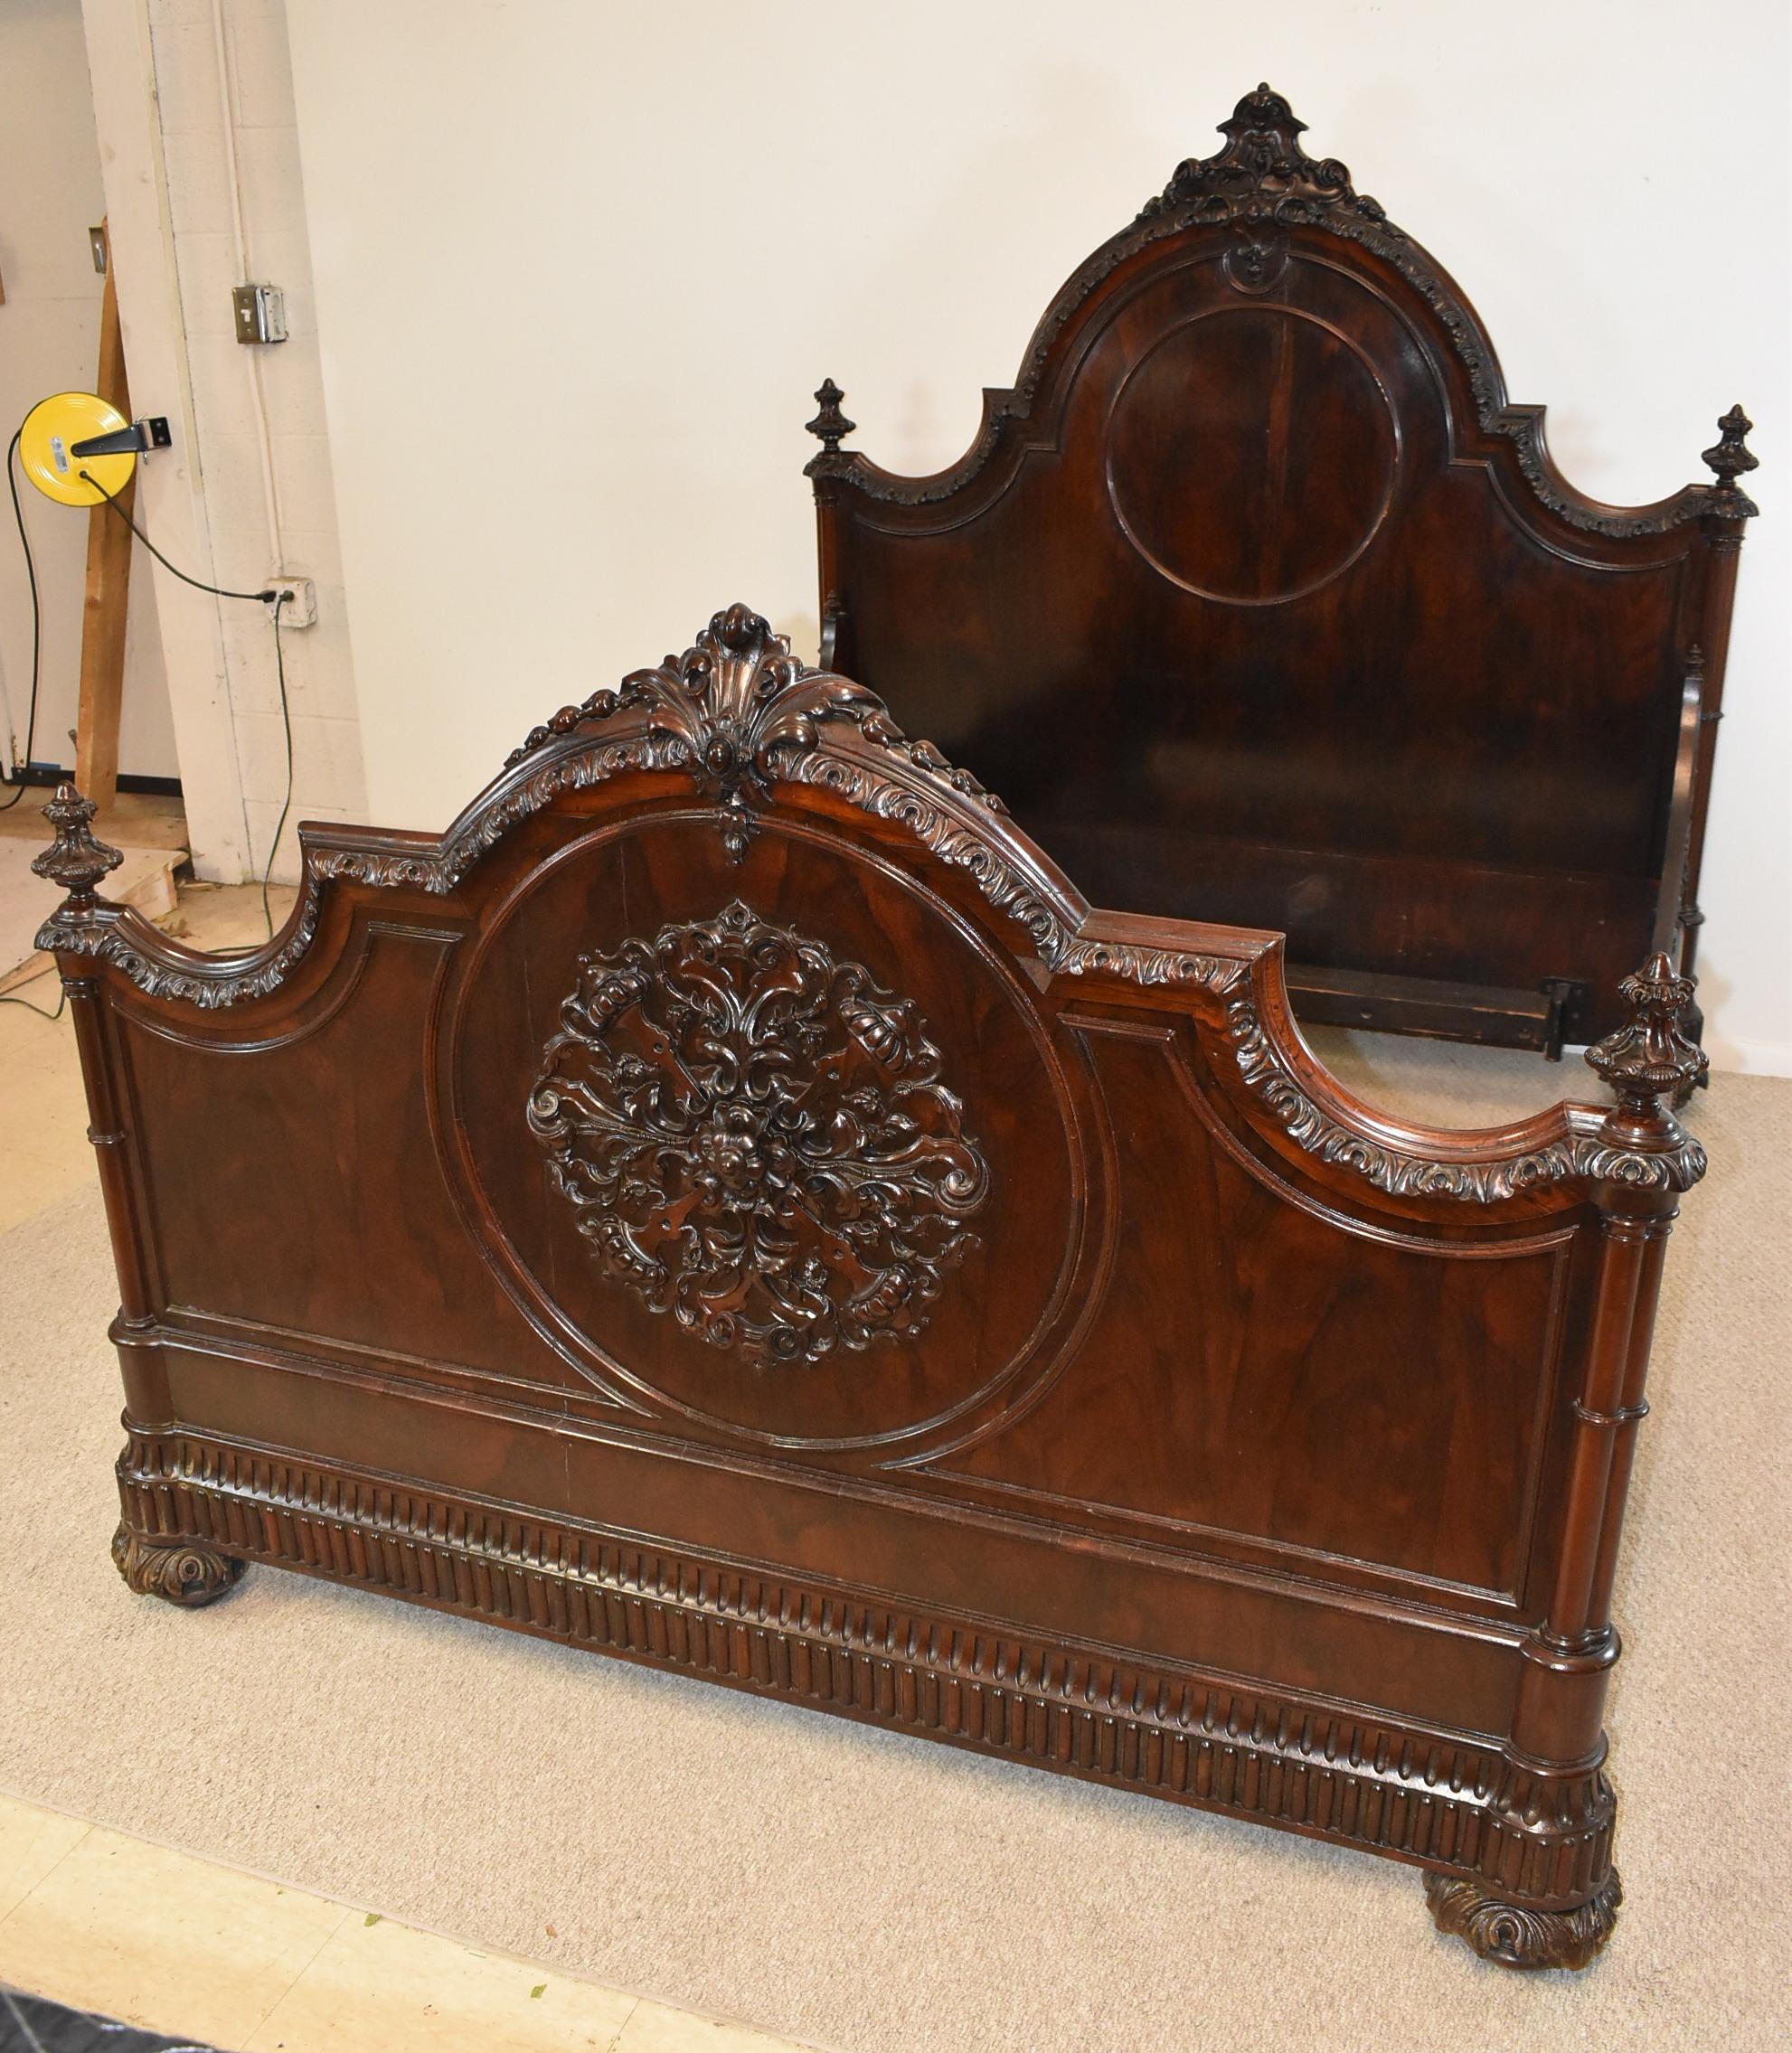 Beautiful Rosewood Bedroom Set, Queen size bed. Rococo styling with intricately carved medallions on the end of the bed and the door fronts. The trim work has rosettes along all of the edges. Detailed bottom edge, 4 finials, a large pediment, side